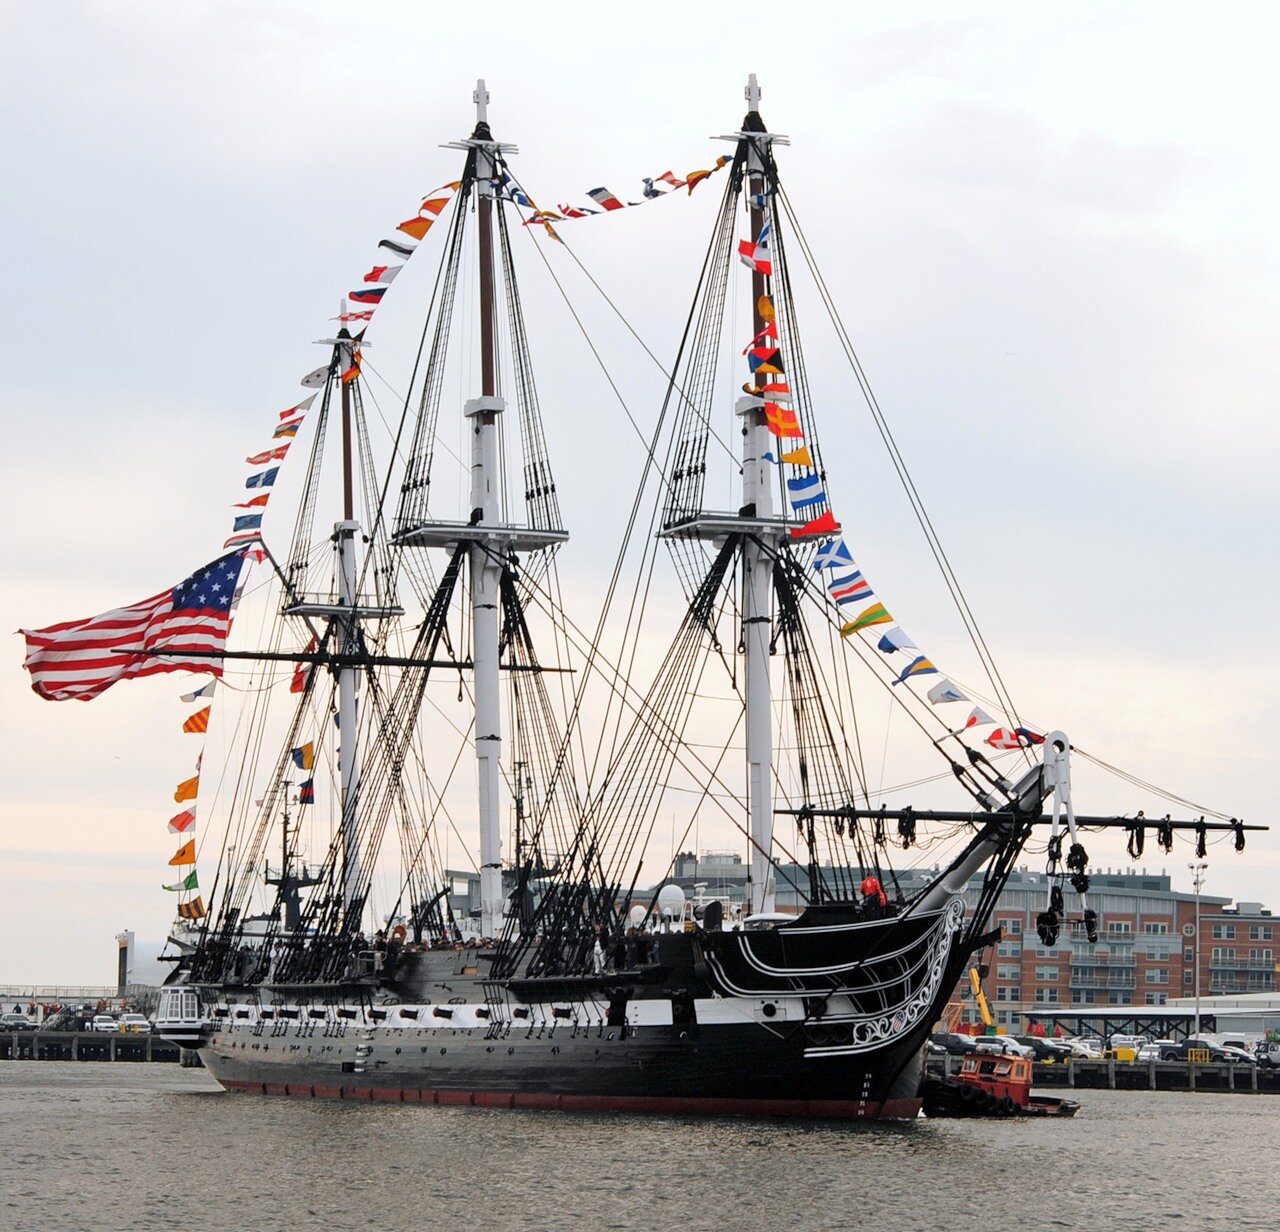 USS Constitution returns to her pier after an underway to celebrate her 213th launching day anniversary